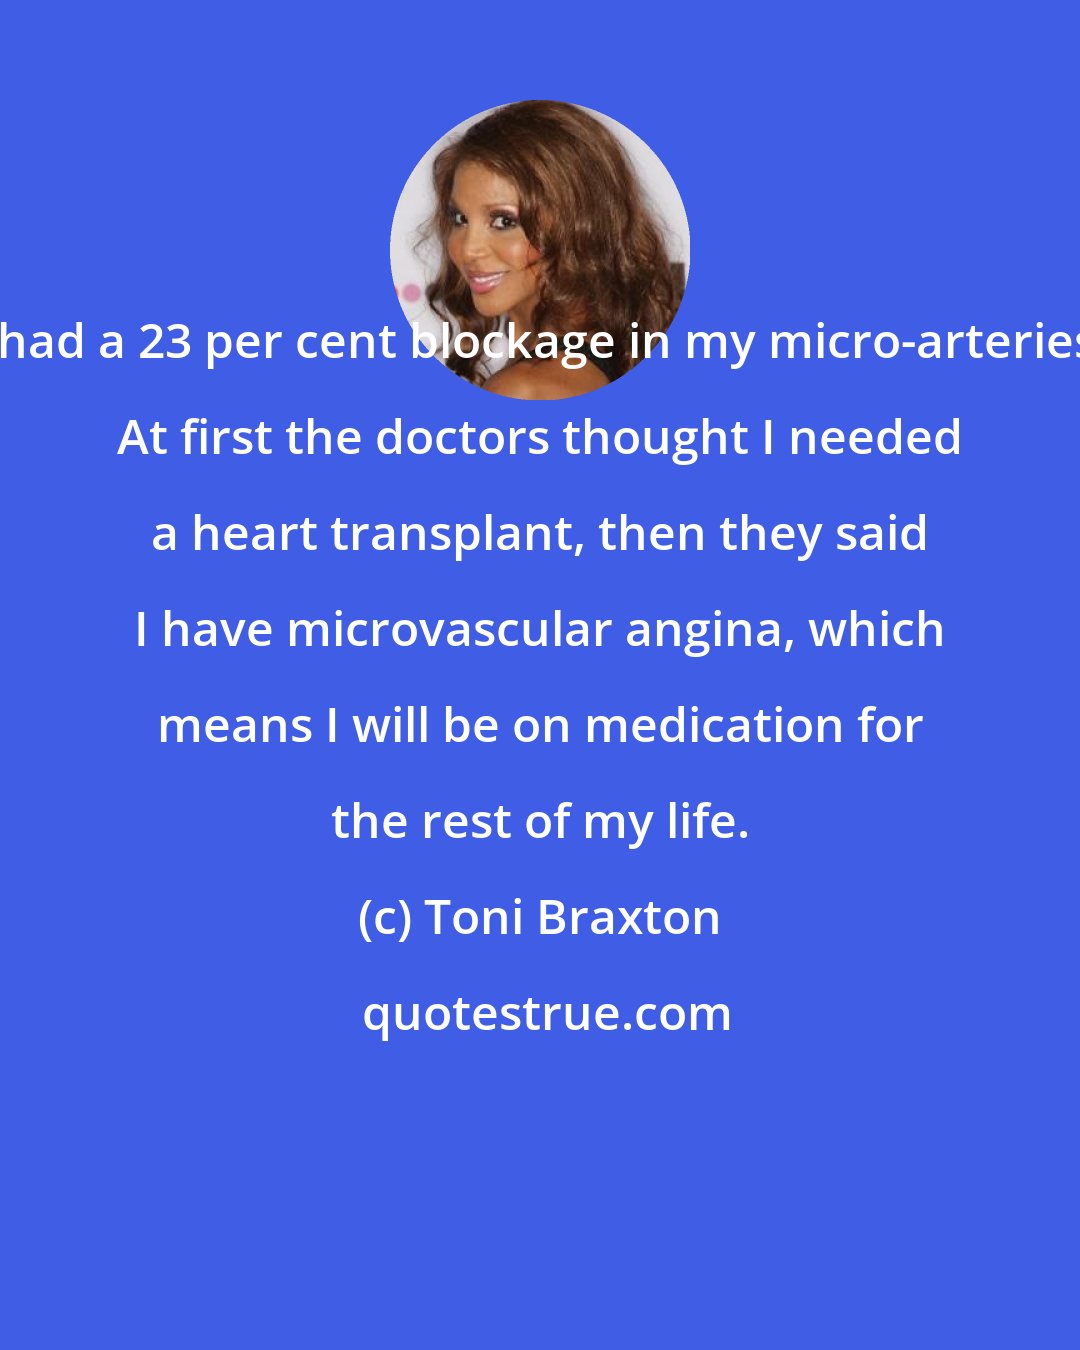 Toni Braxton: I had a 23 per cent blockage in my micro-arteries. At first the doctors thought I needed a heart transplant, then they said I have microvascular angina, which means I will be on medication for the rest of my life.